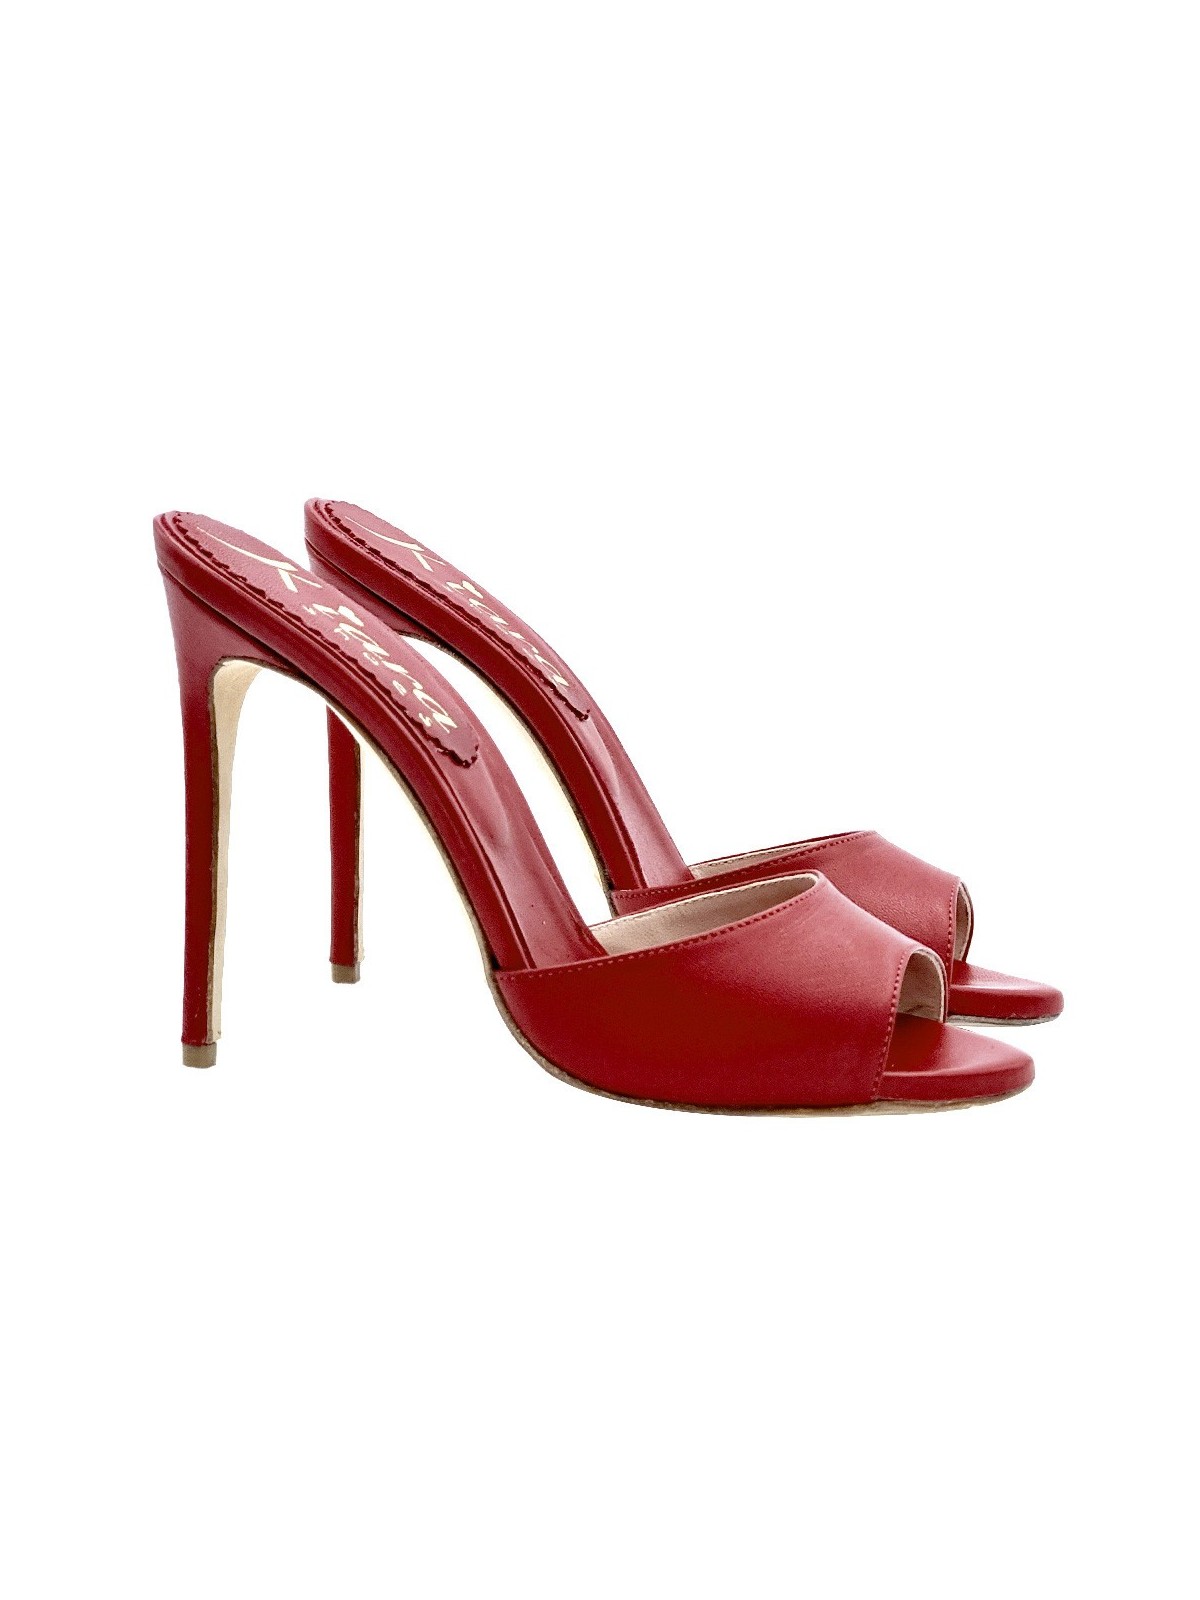 RED LEATHER CLOGS WITH STILETTO